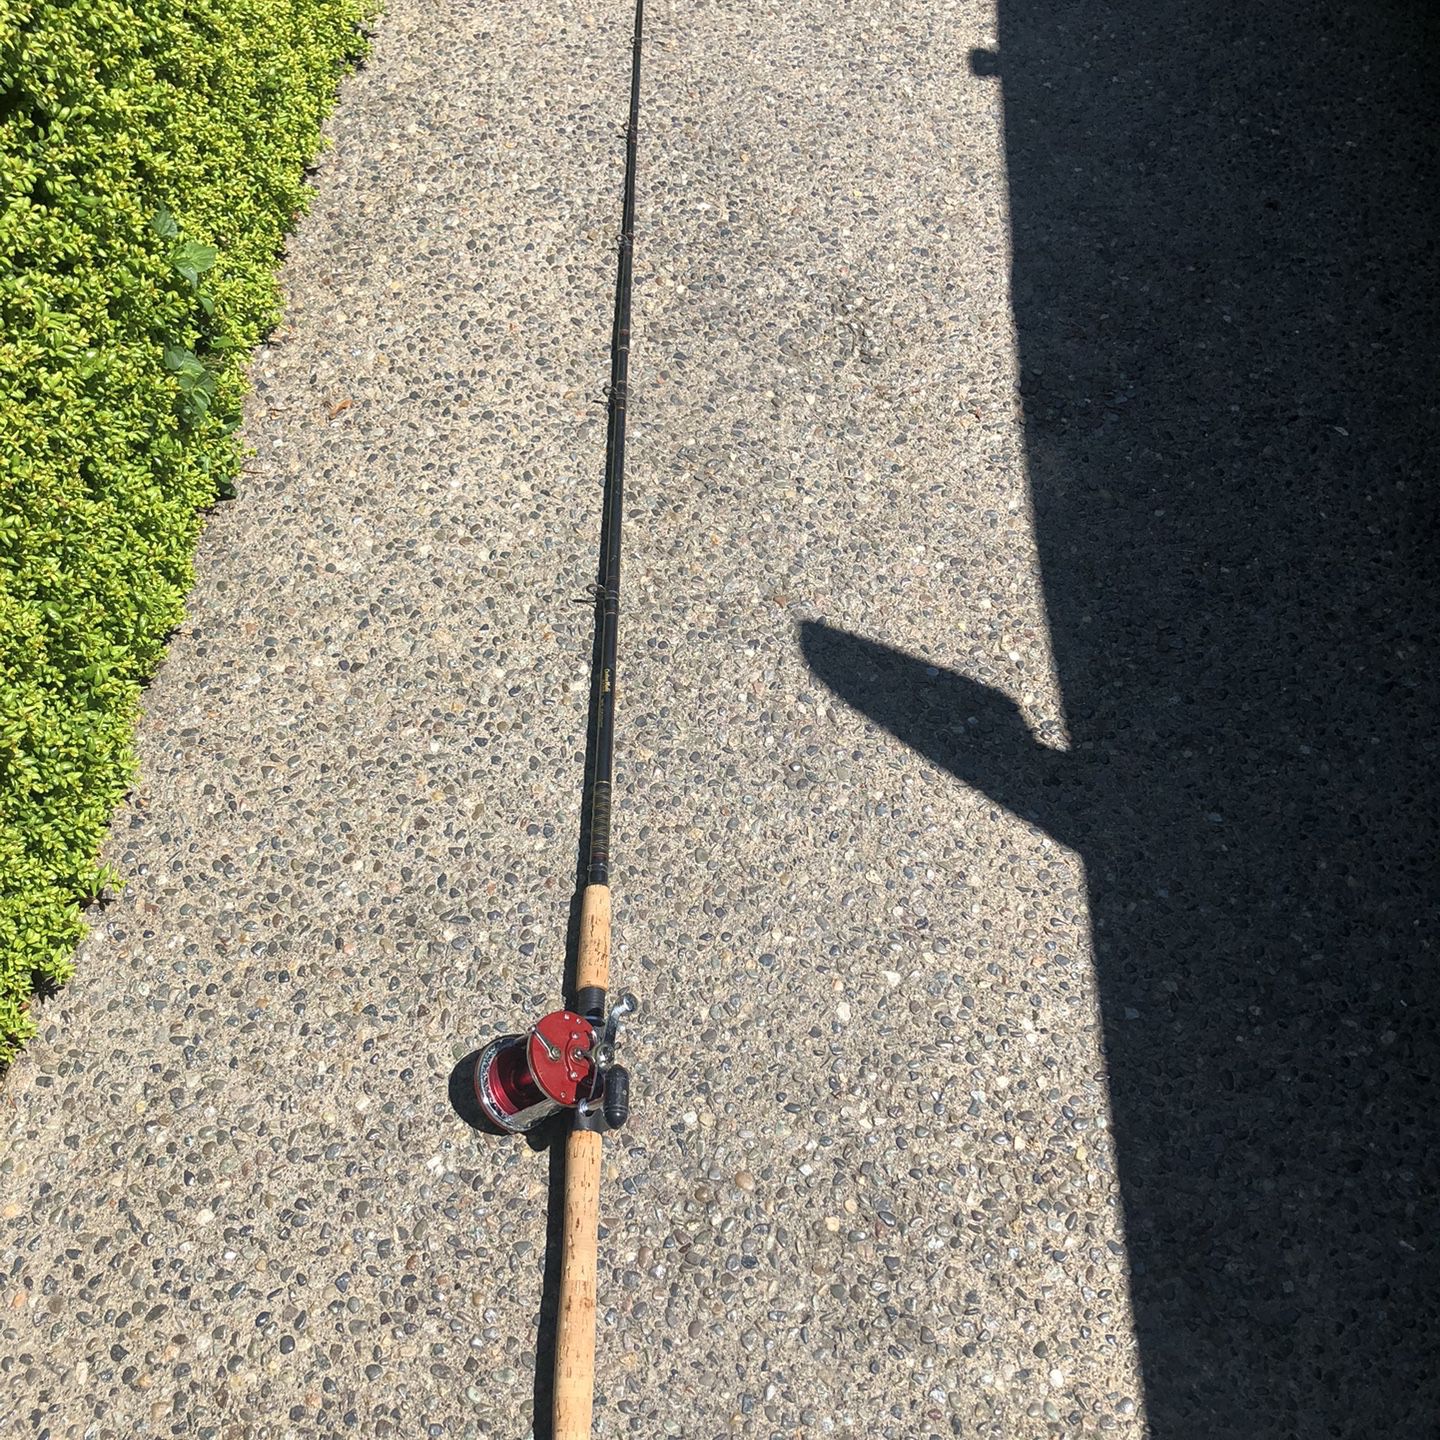 Fishing Reels Sale for Sale in Maple Valley, WA - OfferUp